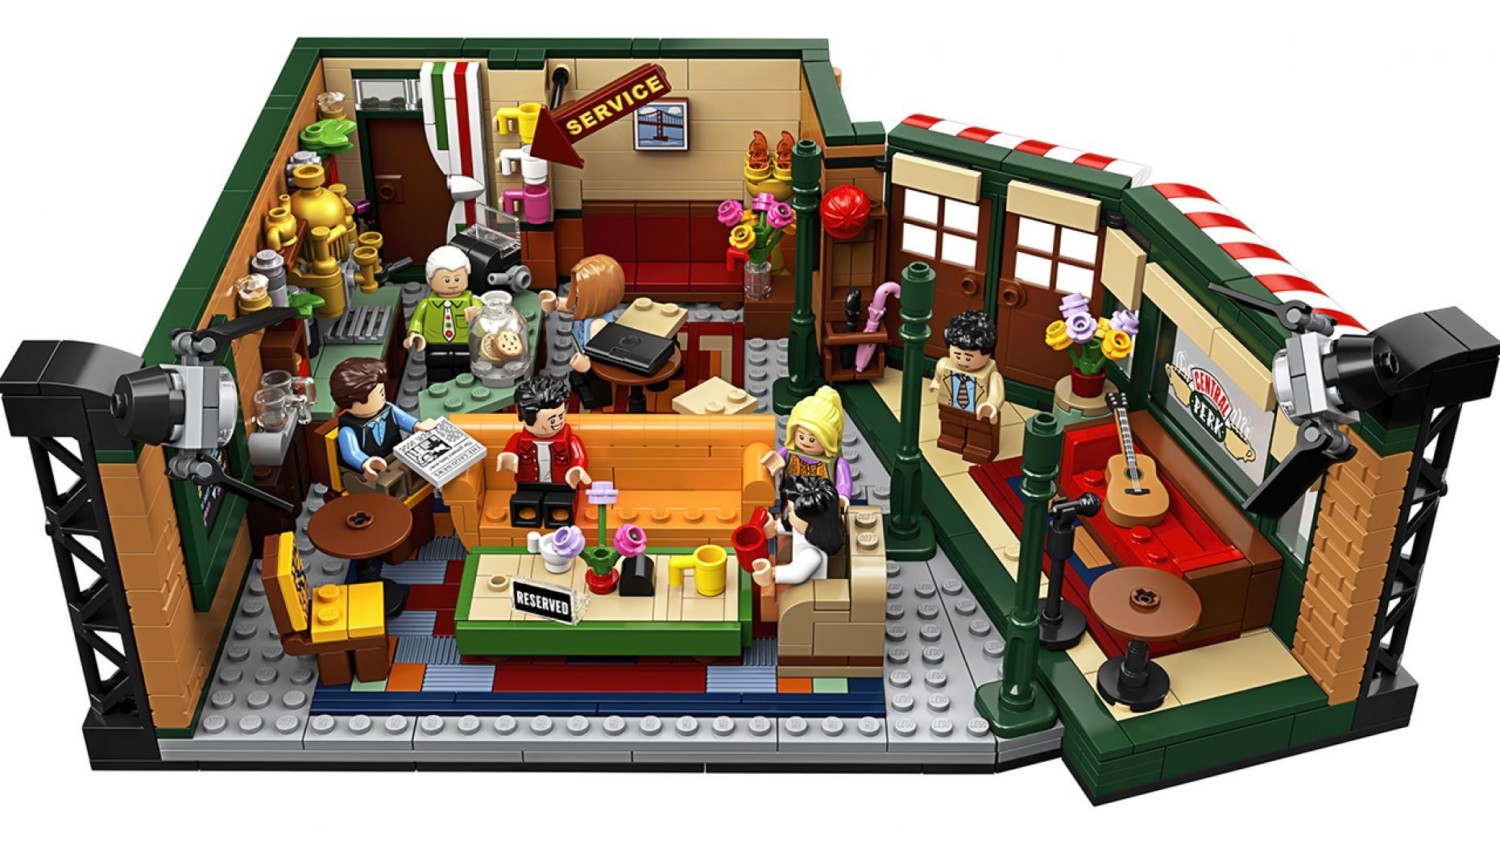 New 'Friends' apartments Lego set includes characters and props